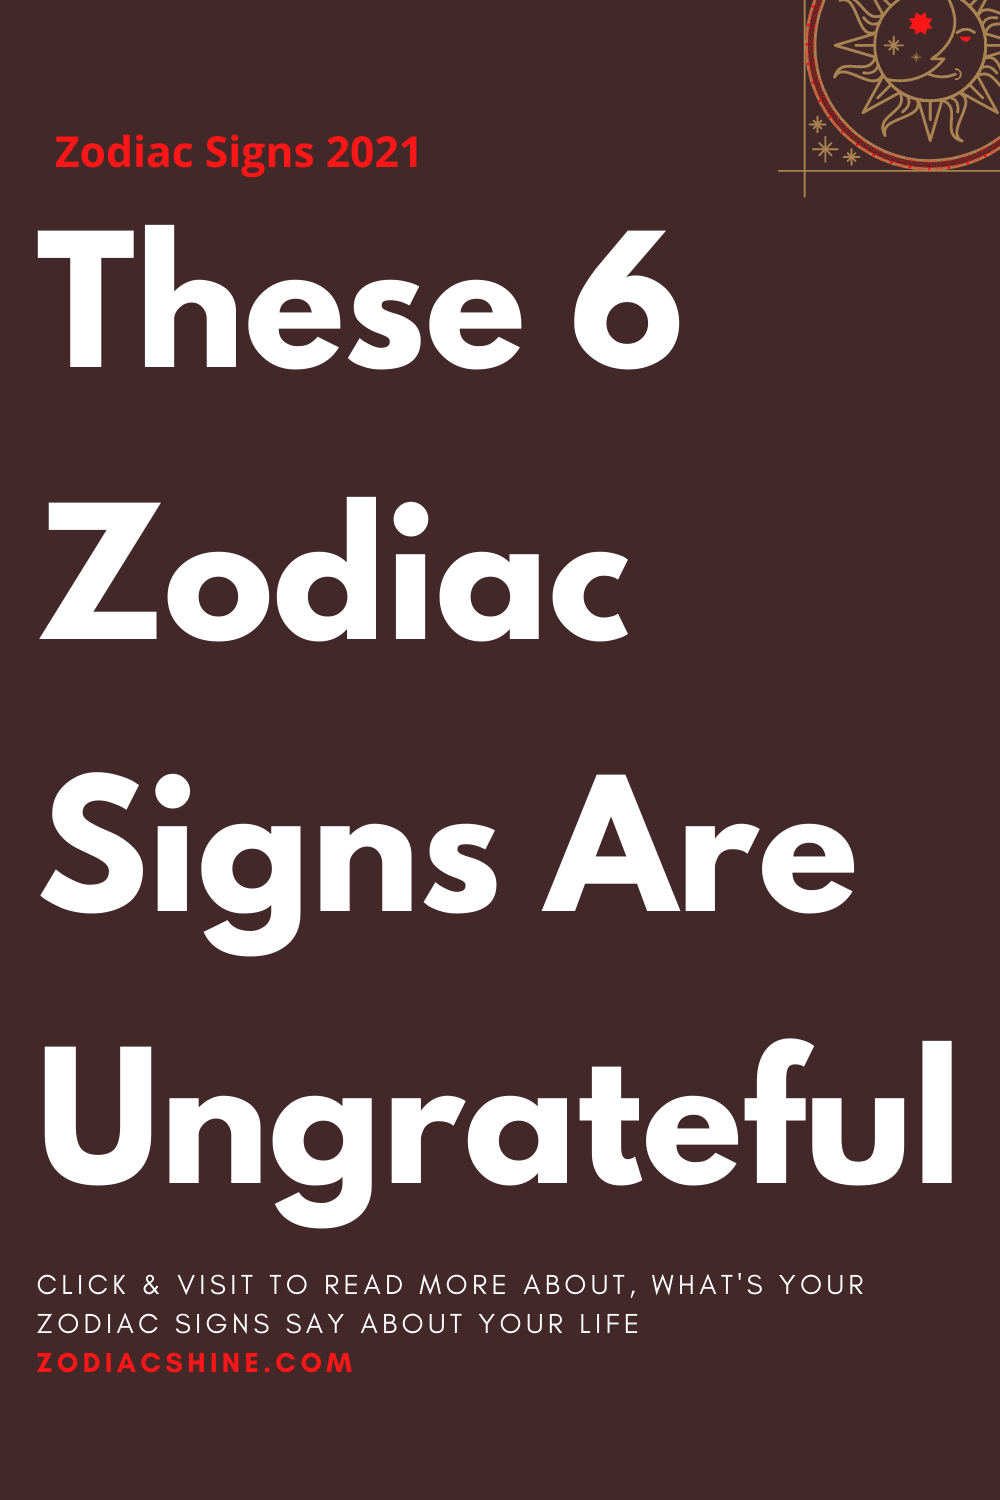 These 6 Zodiac Signs Are Ungrateful